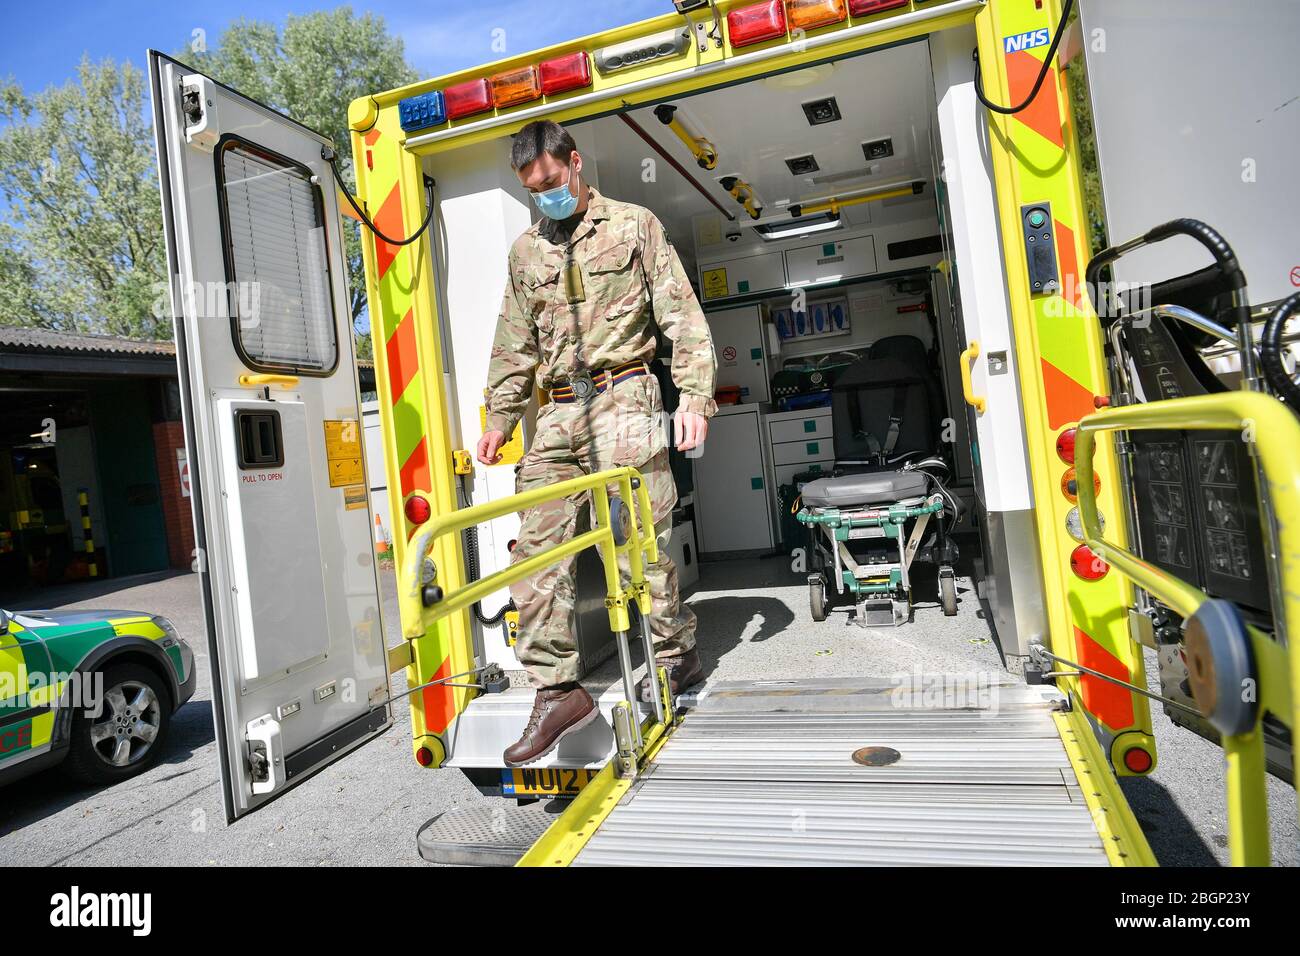 Military personnel from 1st Battalion, Royal Welsh are shown in the back of an ambulance during vehicle familiarisation as they take part in Military Ambulance Driver Induction Training at Taunton Ambulance Station, Taunton, Somerset, to support South West Ambulance Service Trust (SWAST) in the battle against COVID-19. Stock Photo